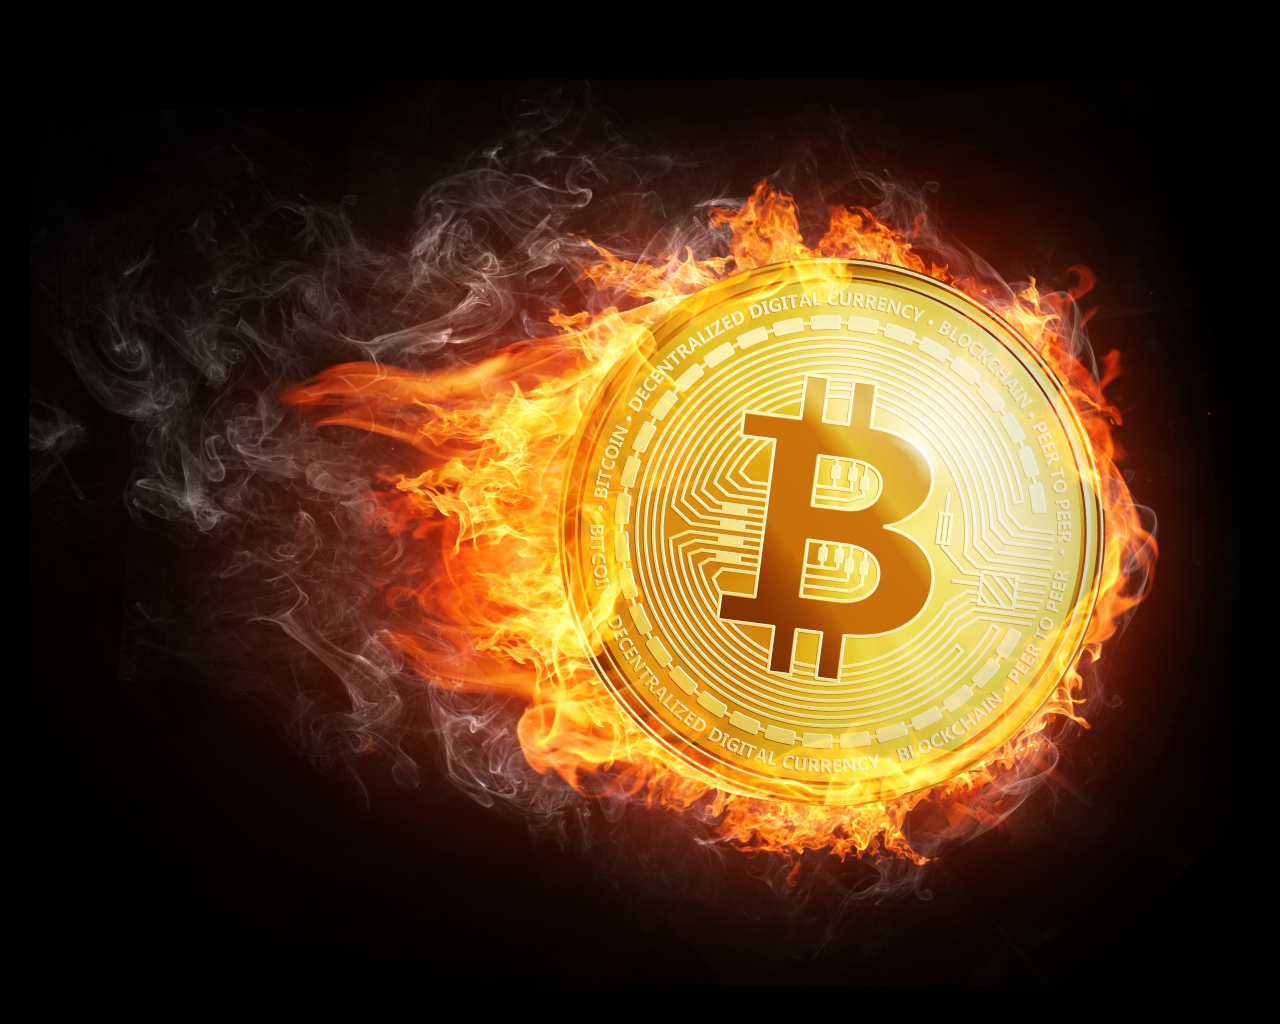 Bitcoin fire coin on a black background